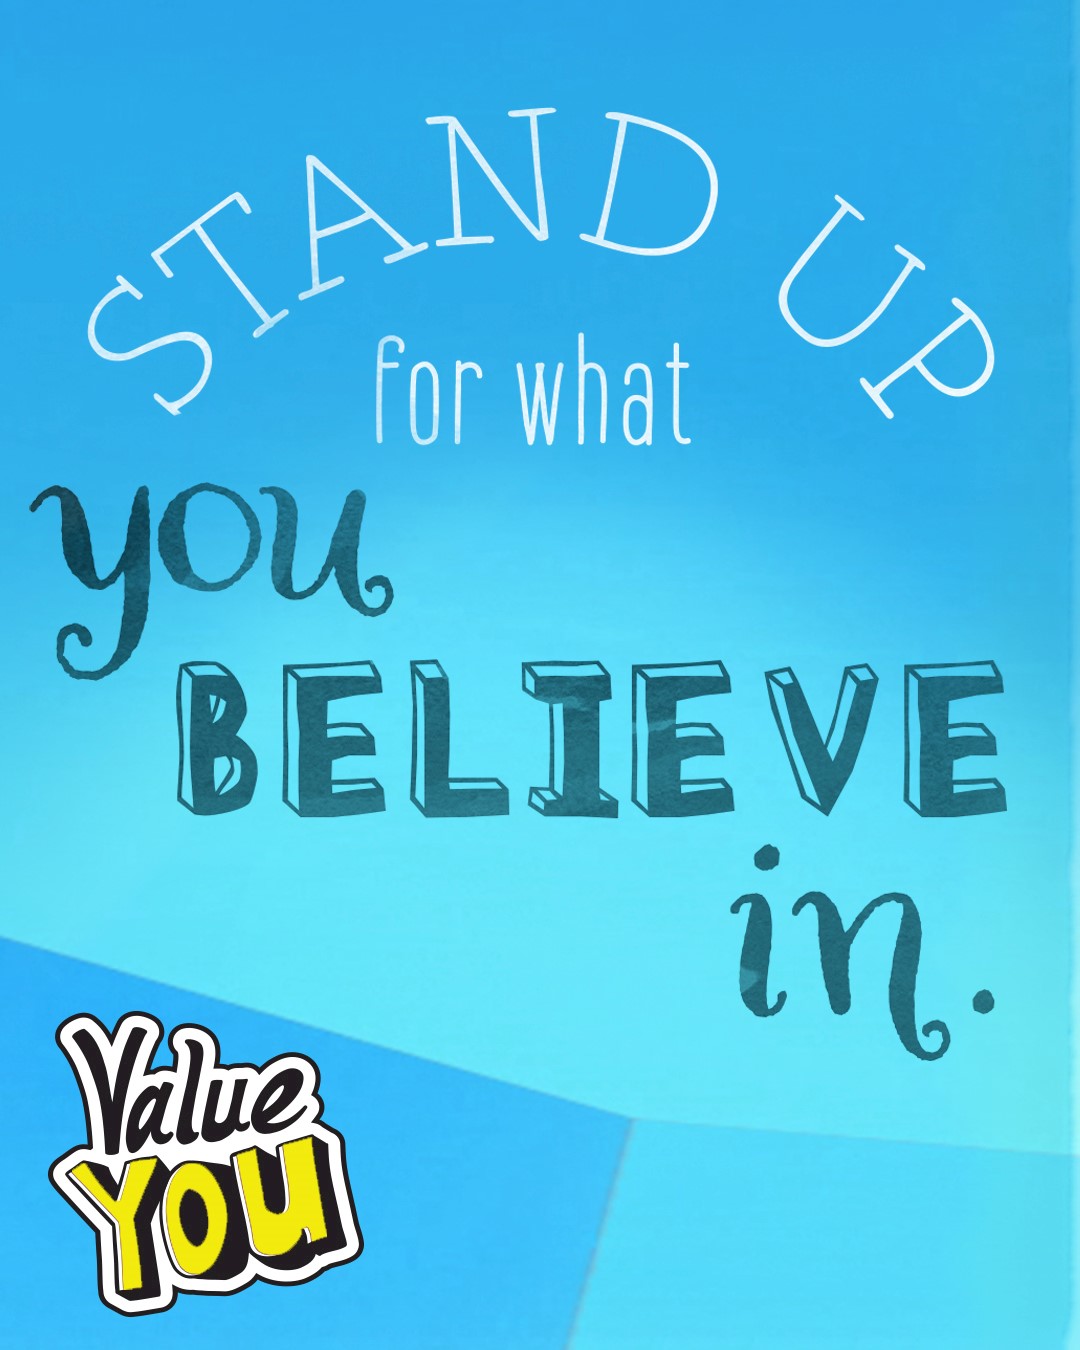 Stand up for what you believe in.